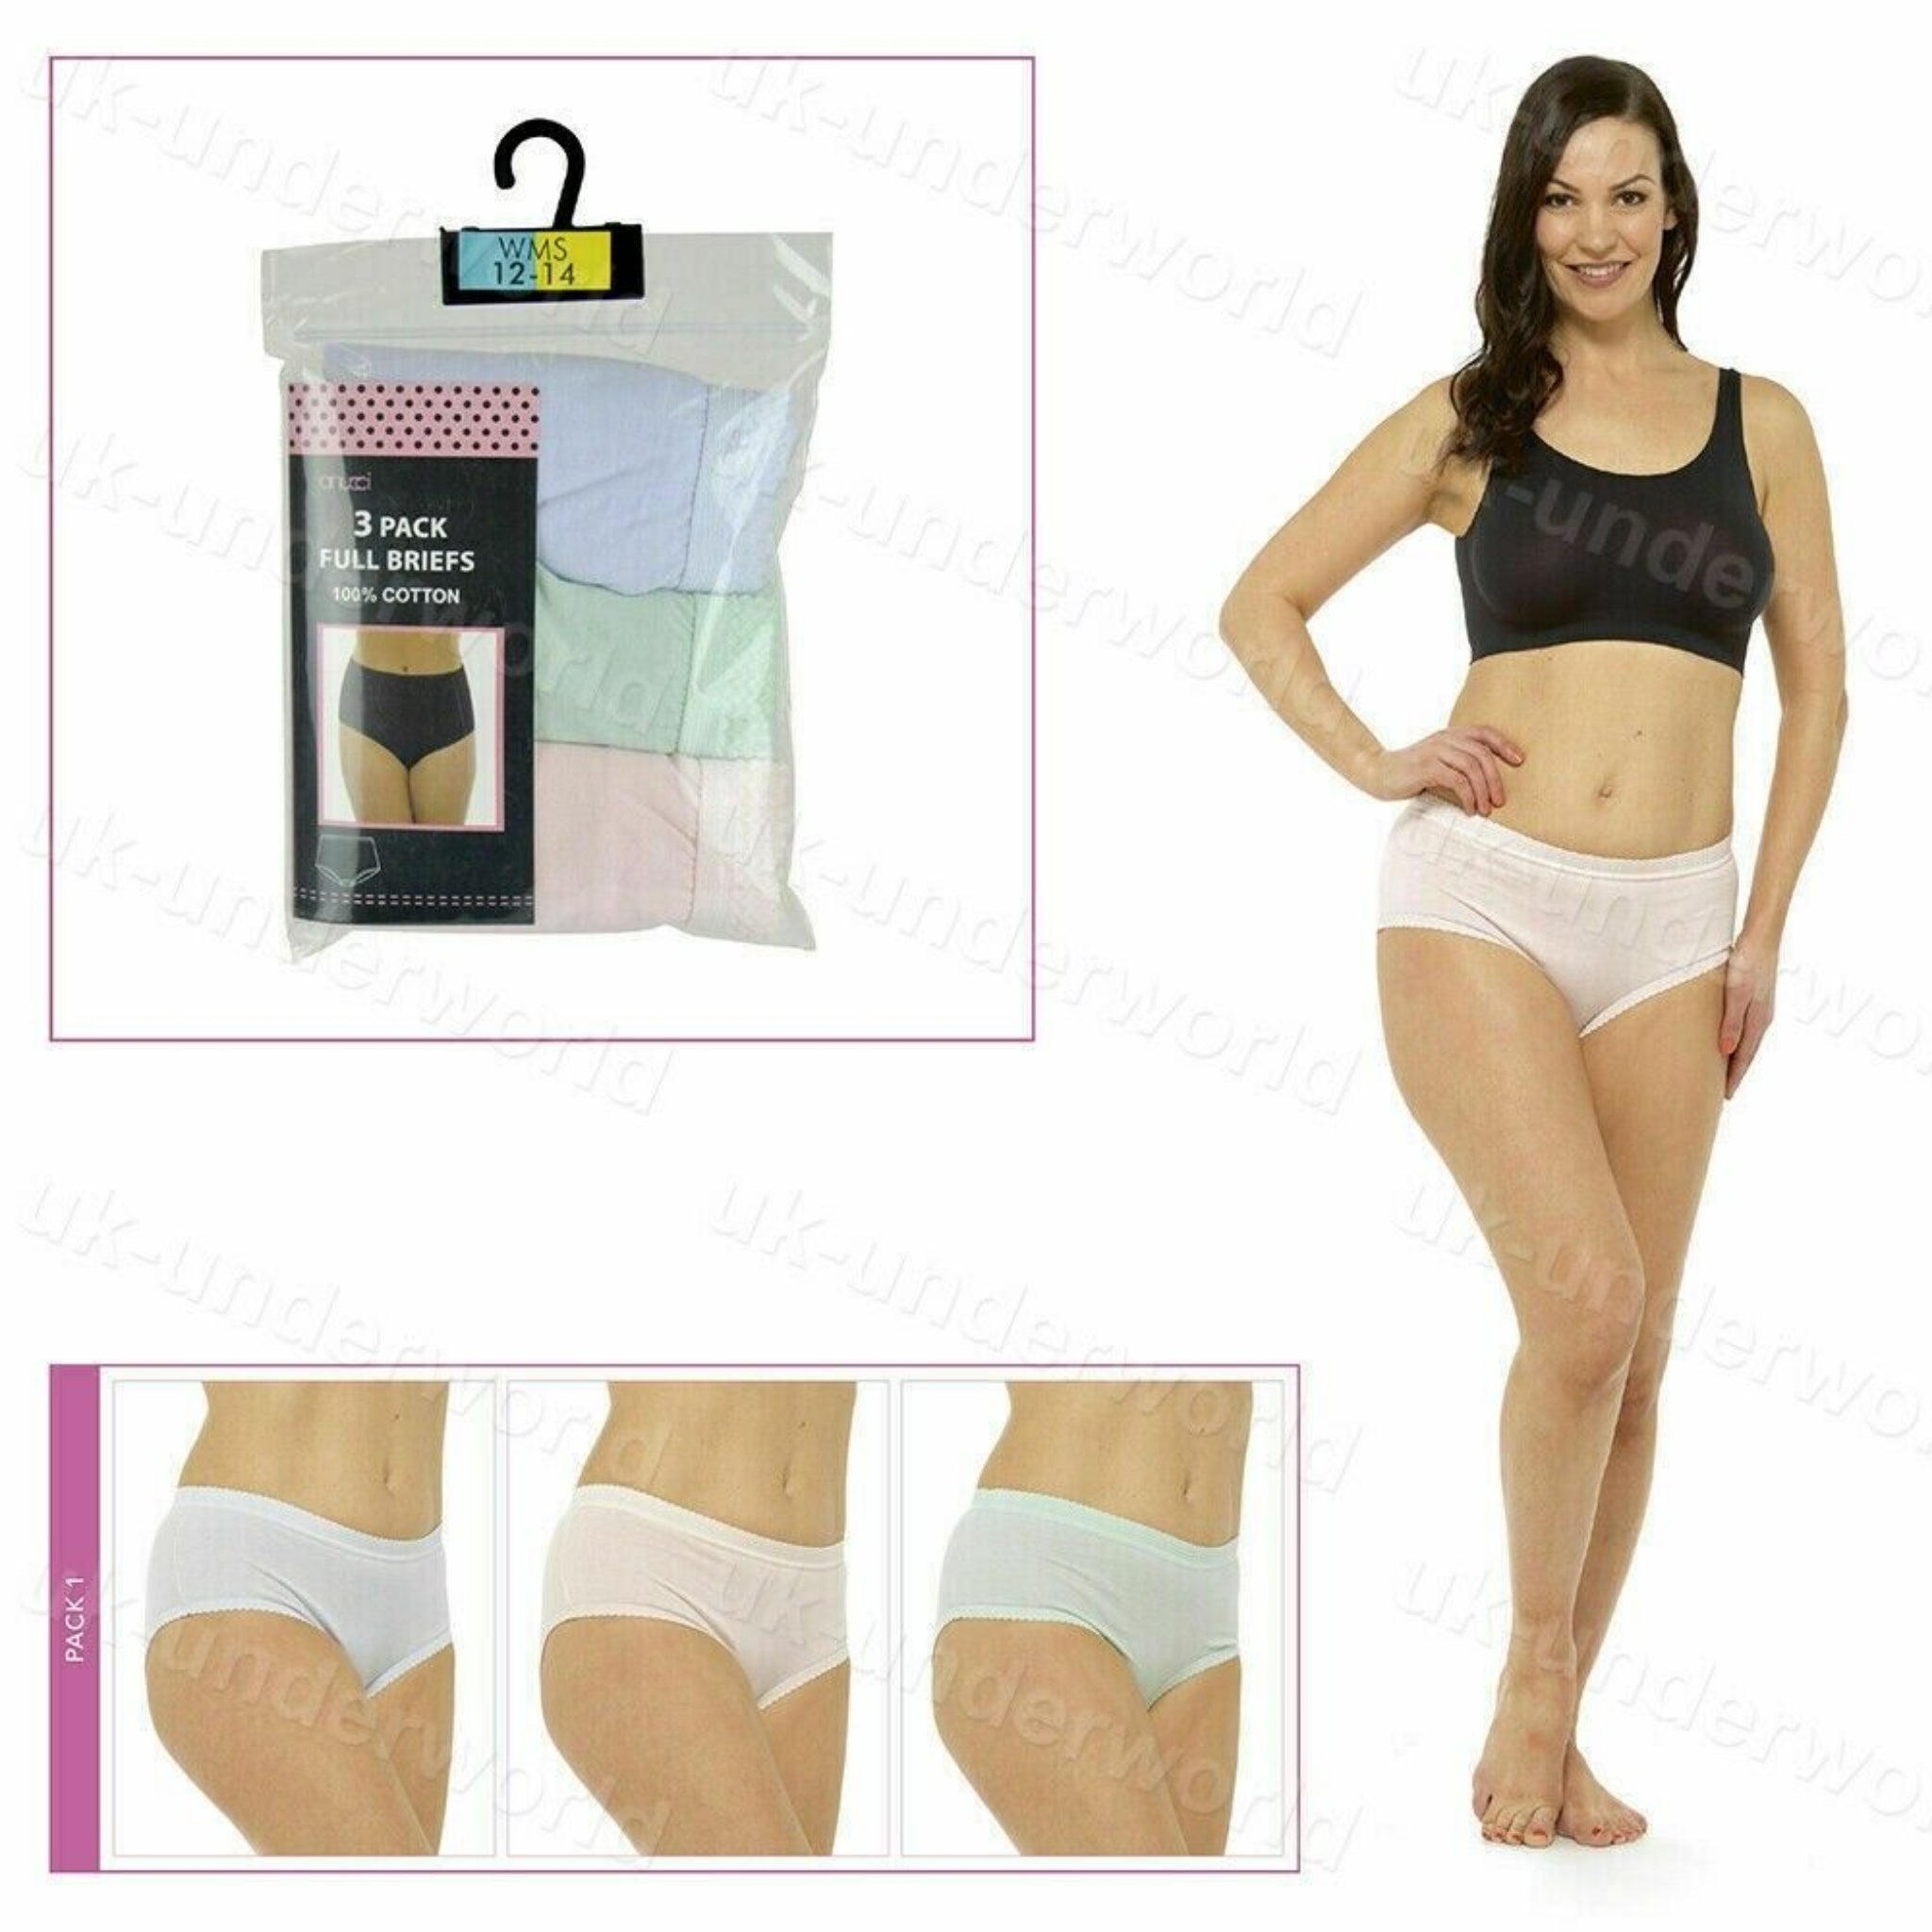 Ladies Women 100% Cotton Maxi Briefs with Lace 3 Pair Pack Size 12 - 20 NEW